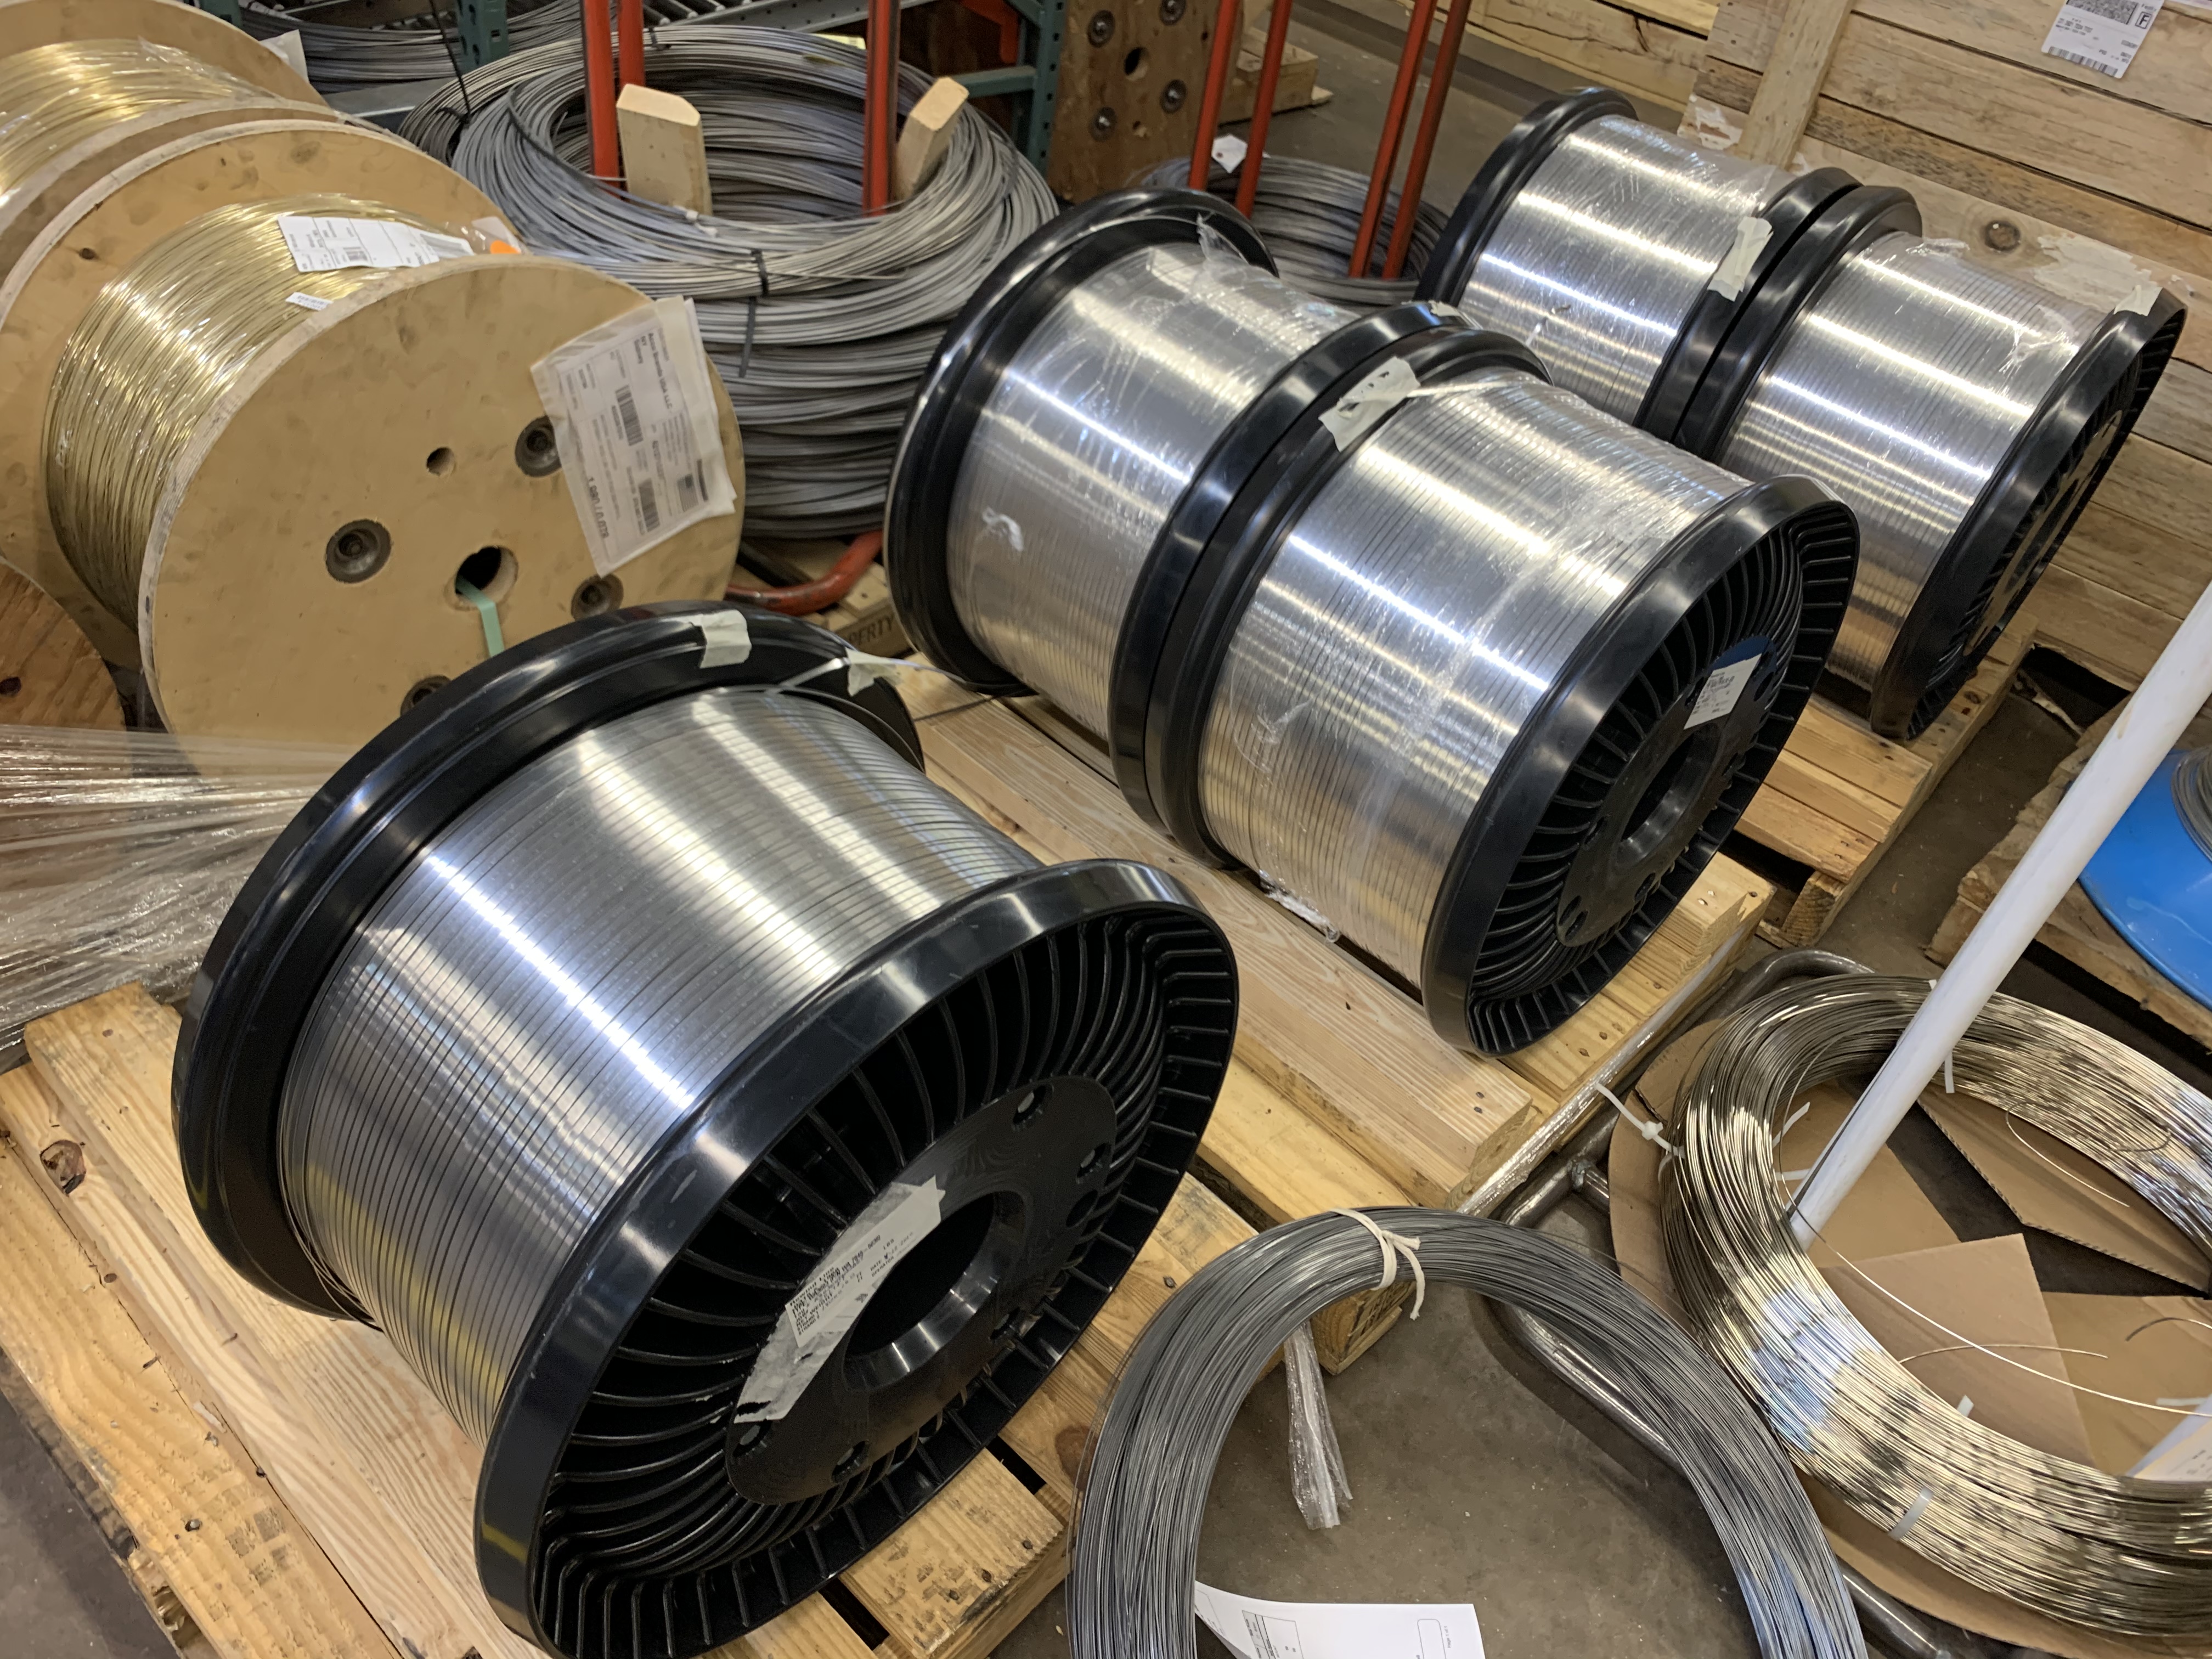 spools of cable for assembly